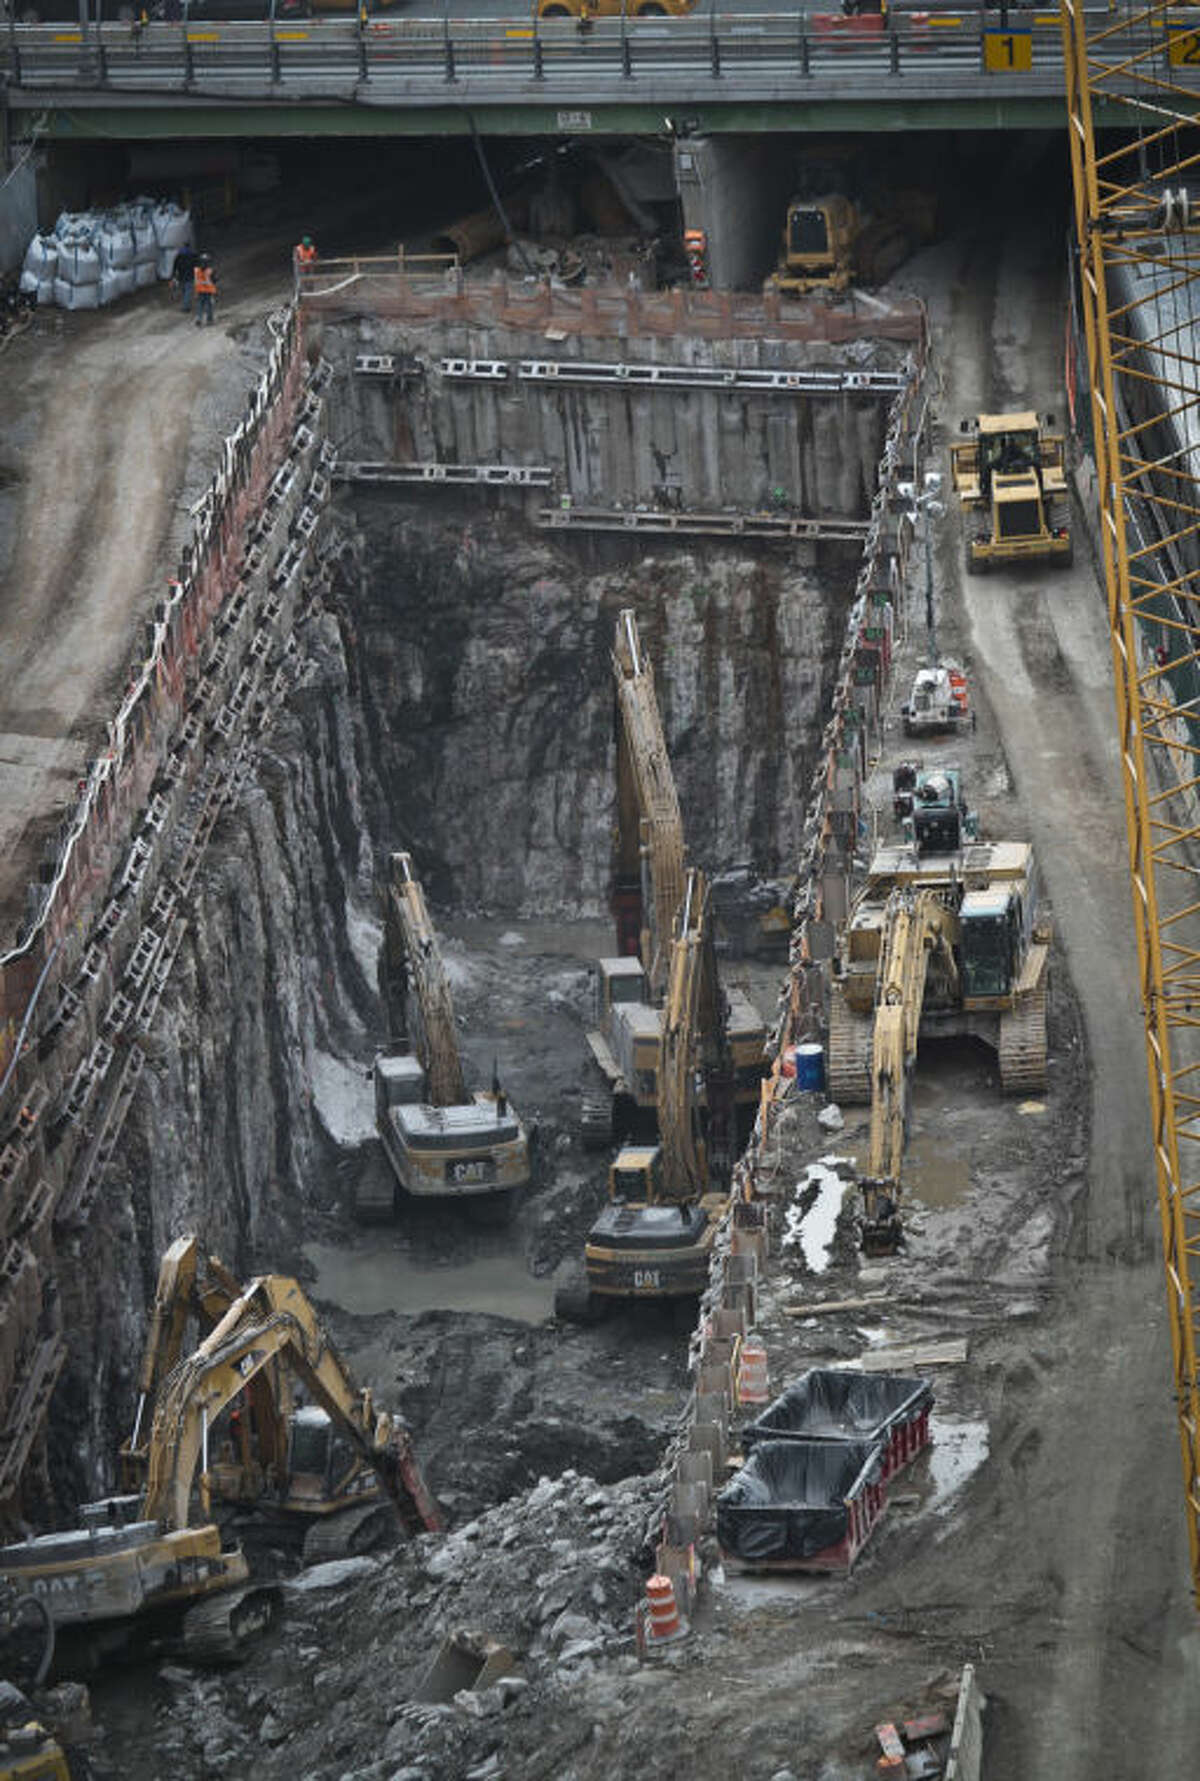 This photo taken on Thursday April 17, 2014, shows ongoing construction of a rail tunnel at the Hudson Yards redevelopment site on Manhattan's west side in New York. Amtrak is constructing an 800-foot-long concrete box inside the project to preserve space for a tunnel from Newark to New York City that would allow it to double rail capacity across the Hudson River. (AP Photo/Bebeto Matthews)